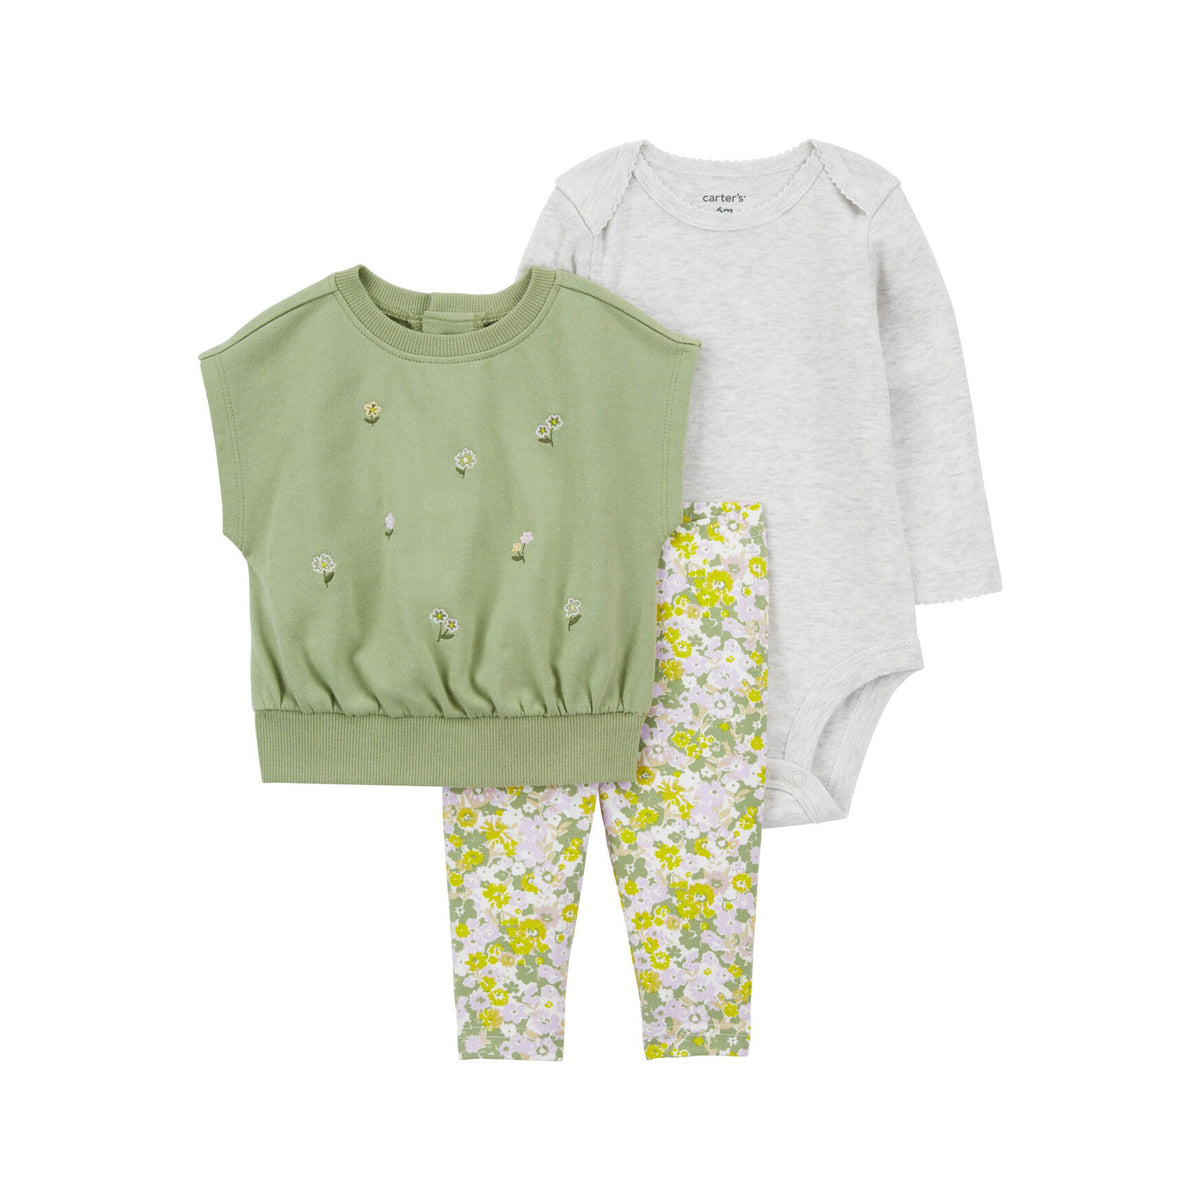 Carter's yellow and green small floral 3-piece set (6M-24M)